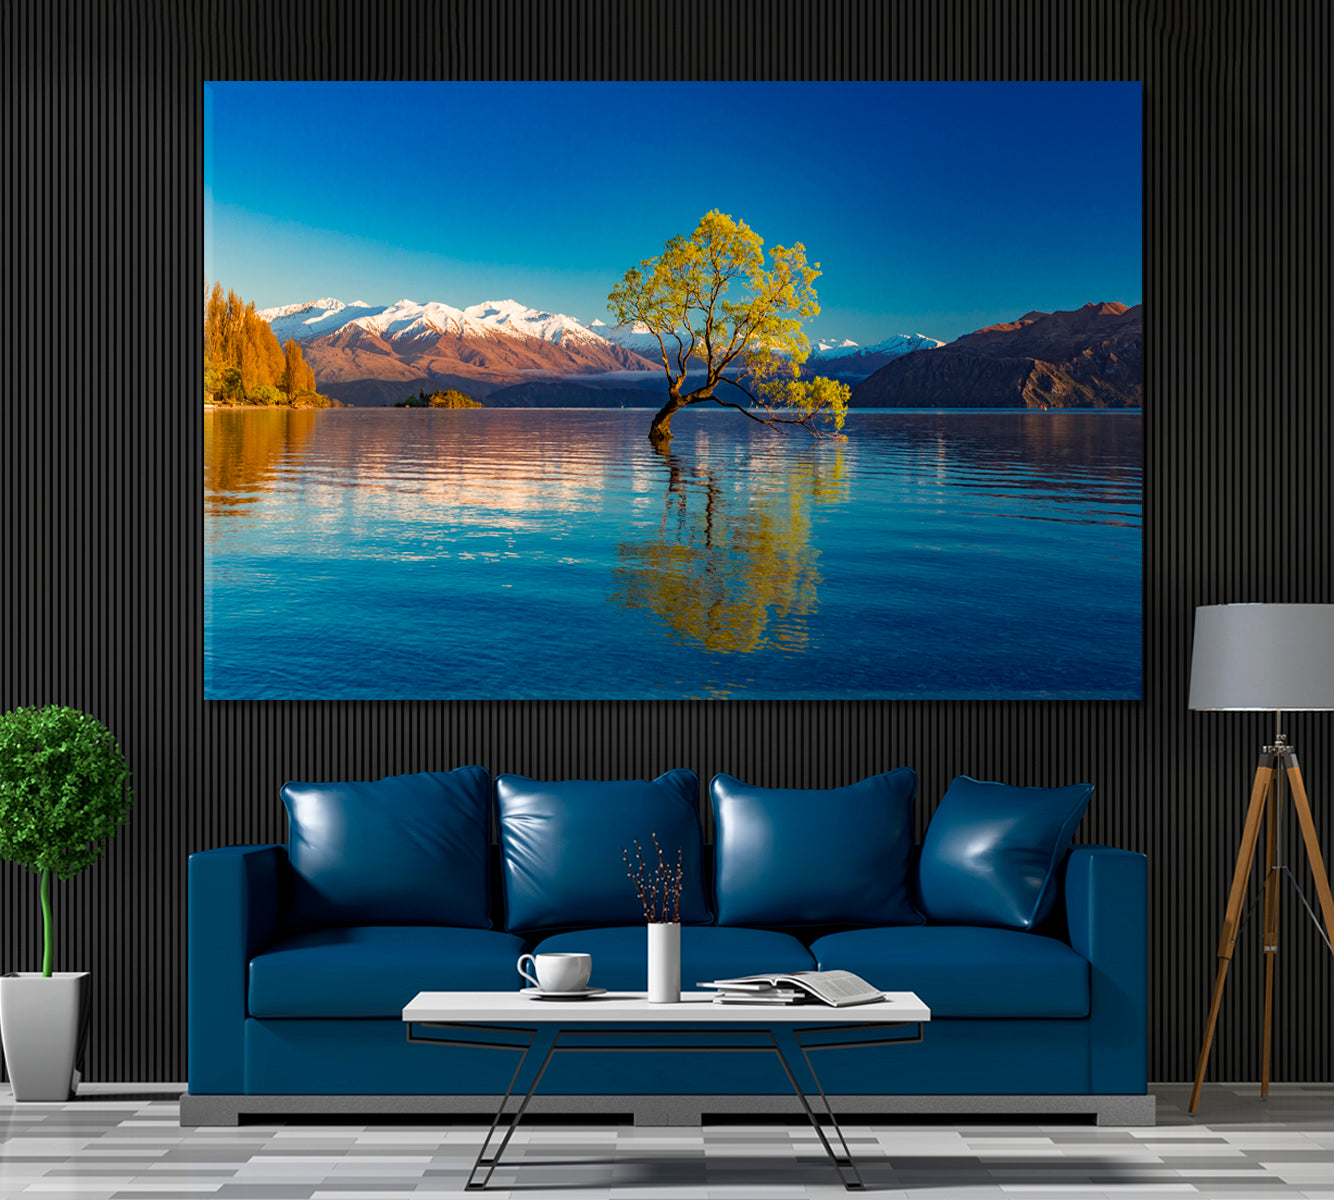 Lonely Tree in Lake Wanaka New Zealand Canvas Print ArtLexy 1 Panel 24"x16" inches 